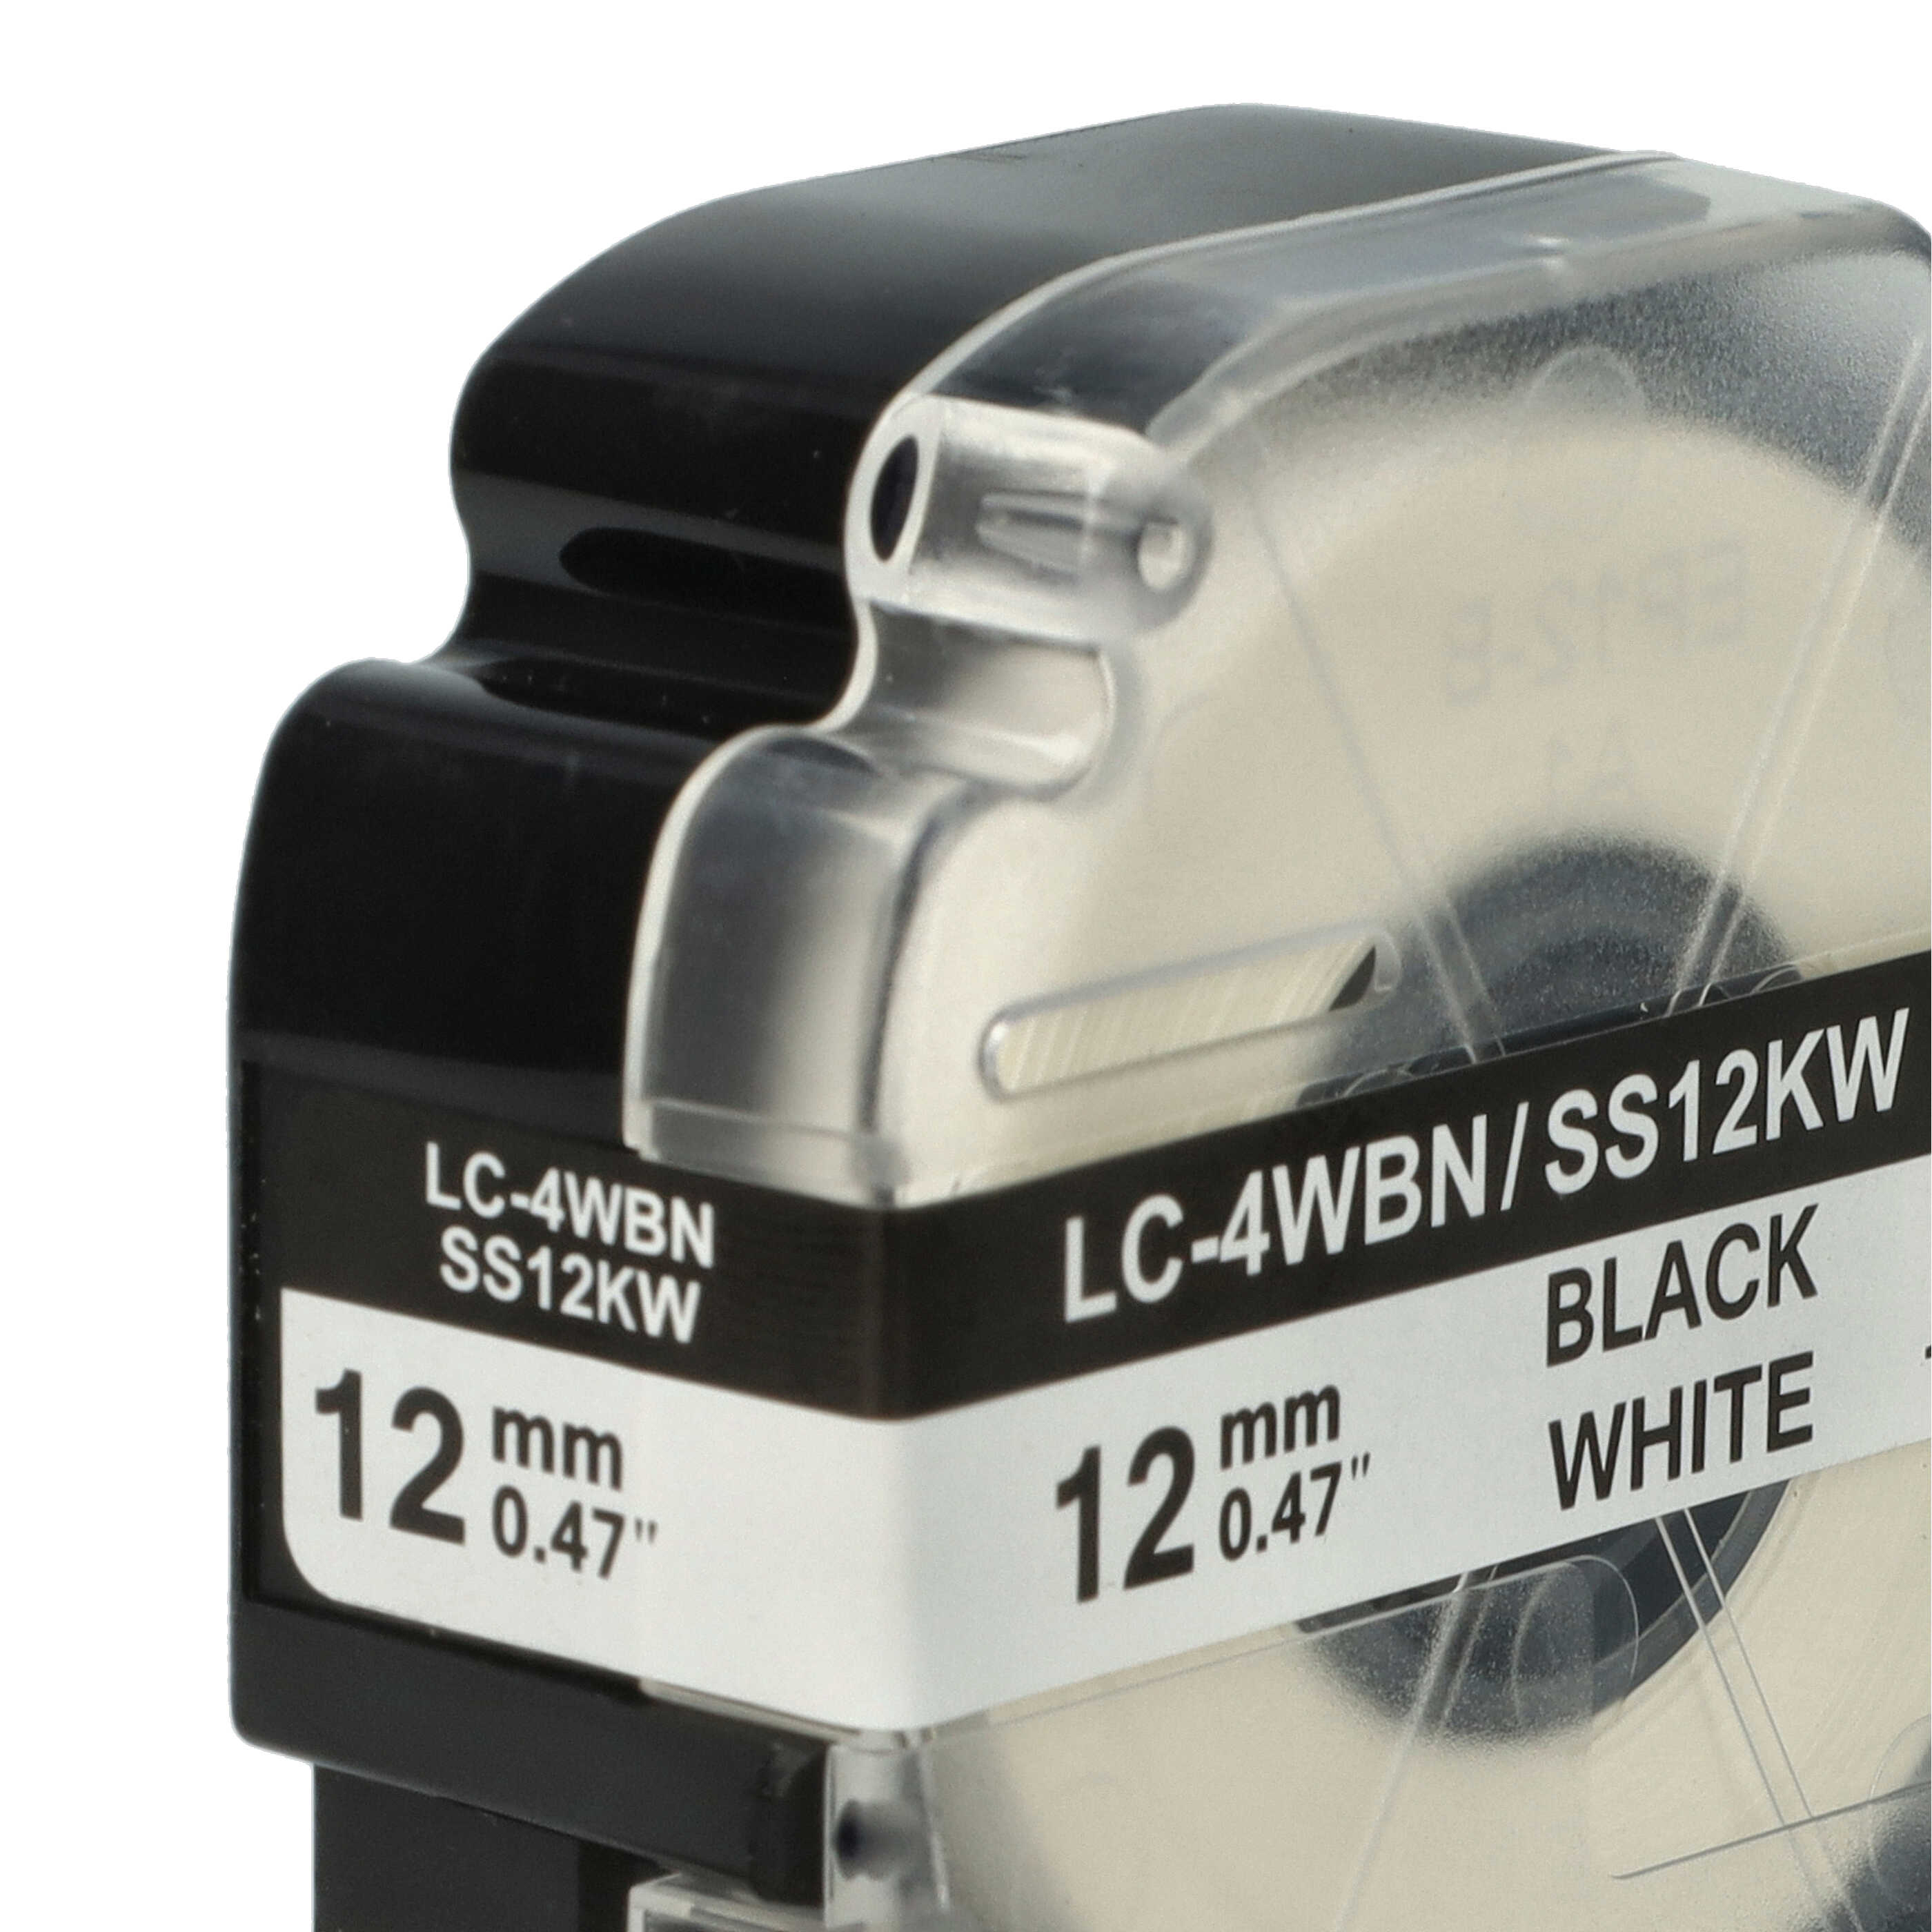 10x Label Tape as Replacement for Epson SS12KW, LC-4WBN - 12 mm Black to White